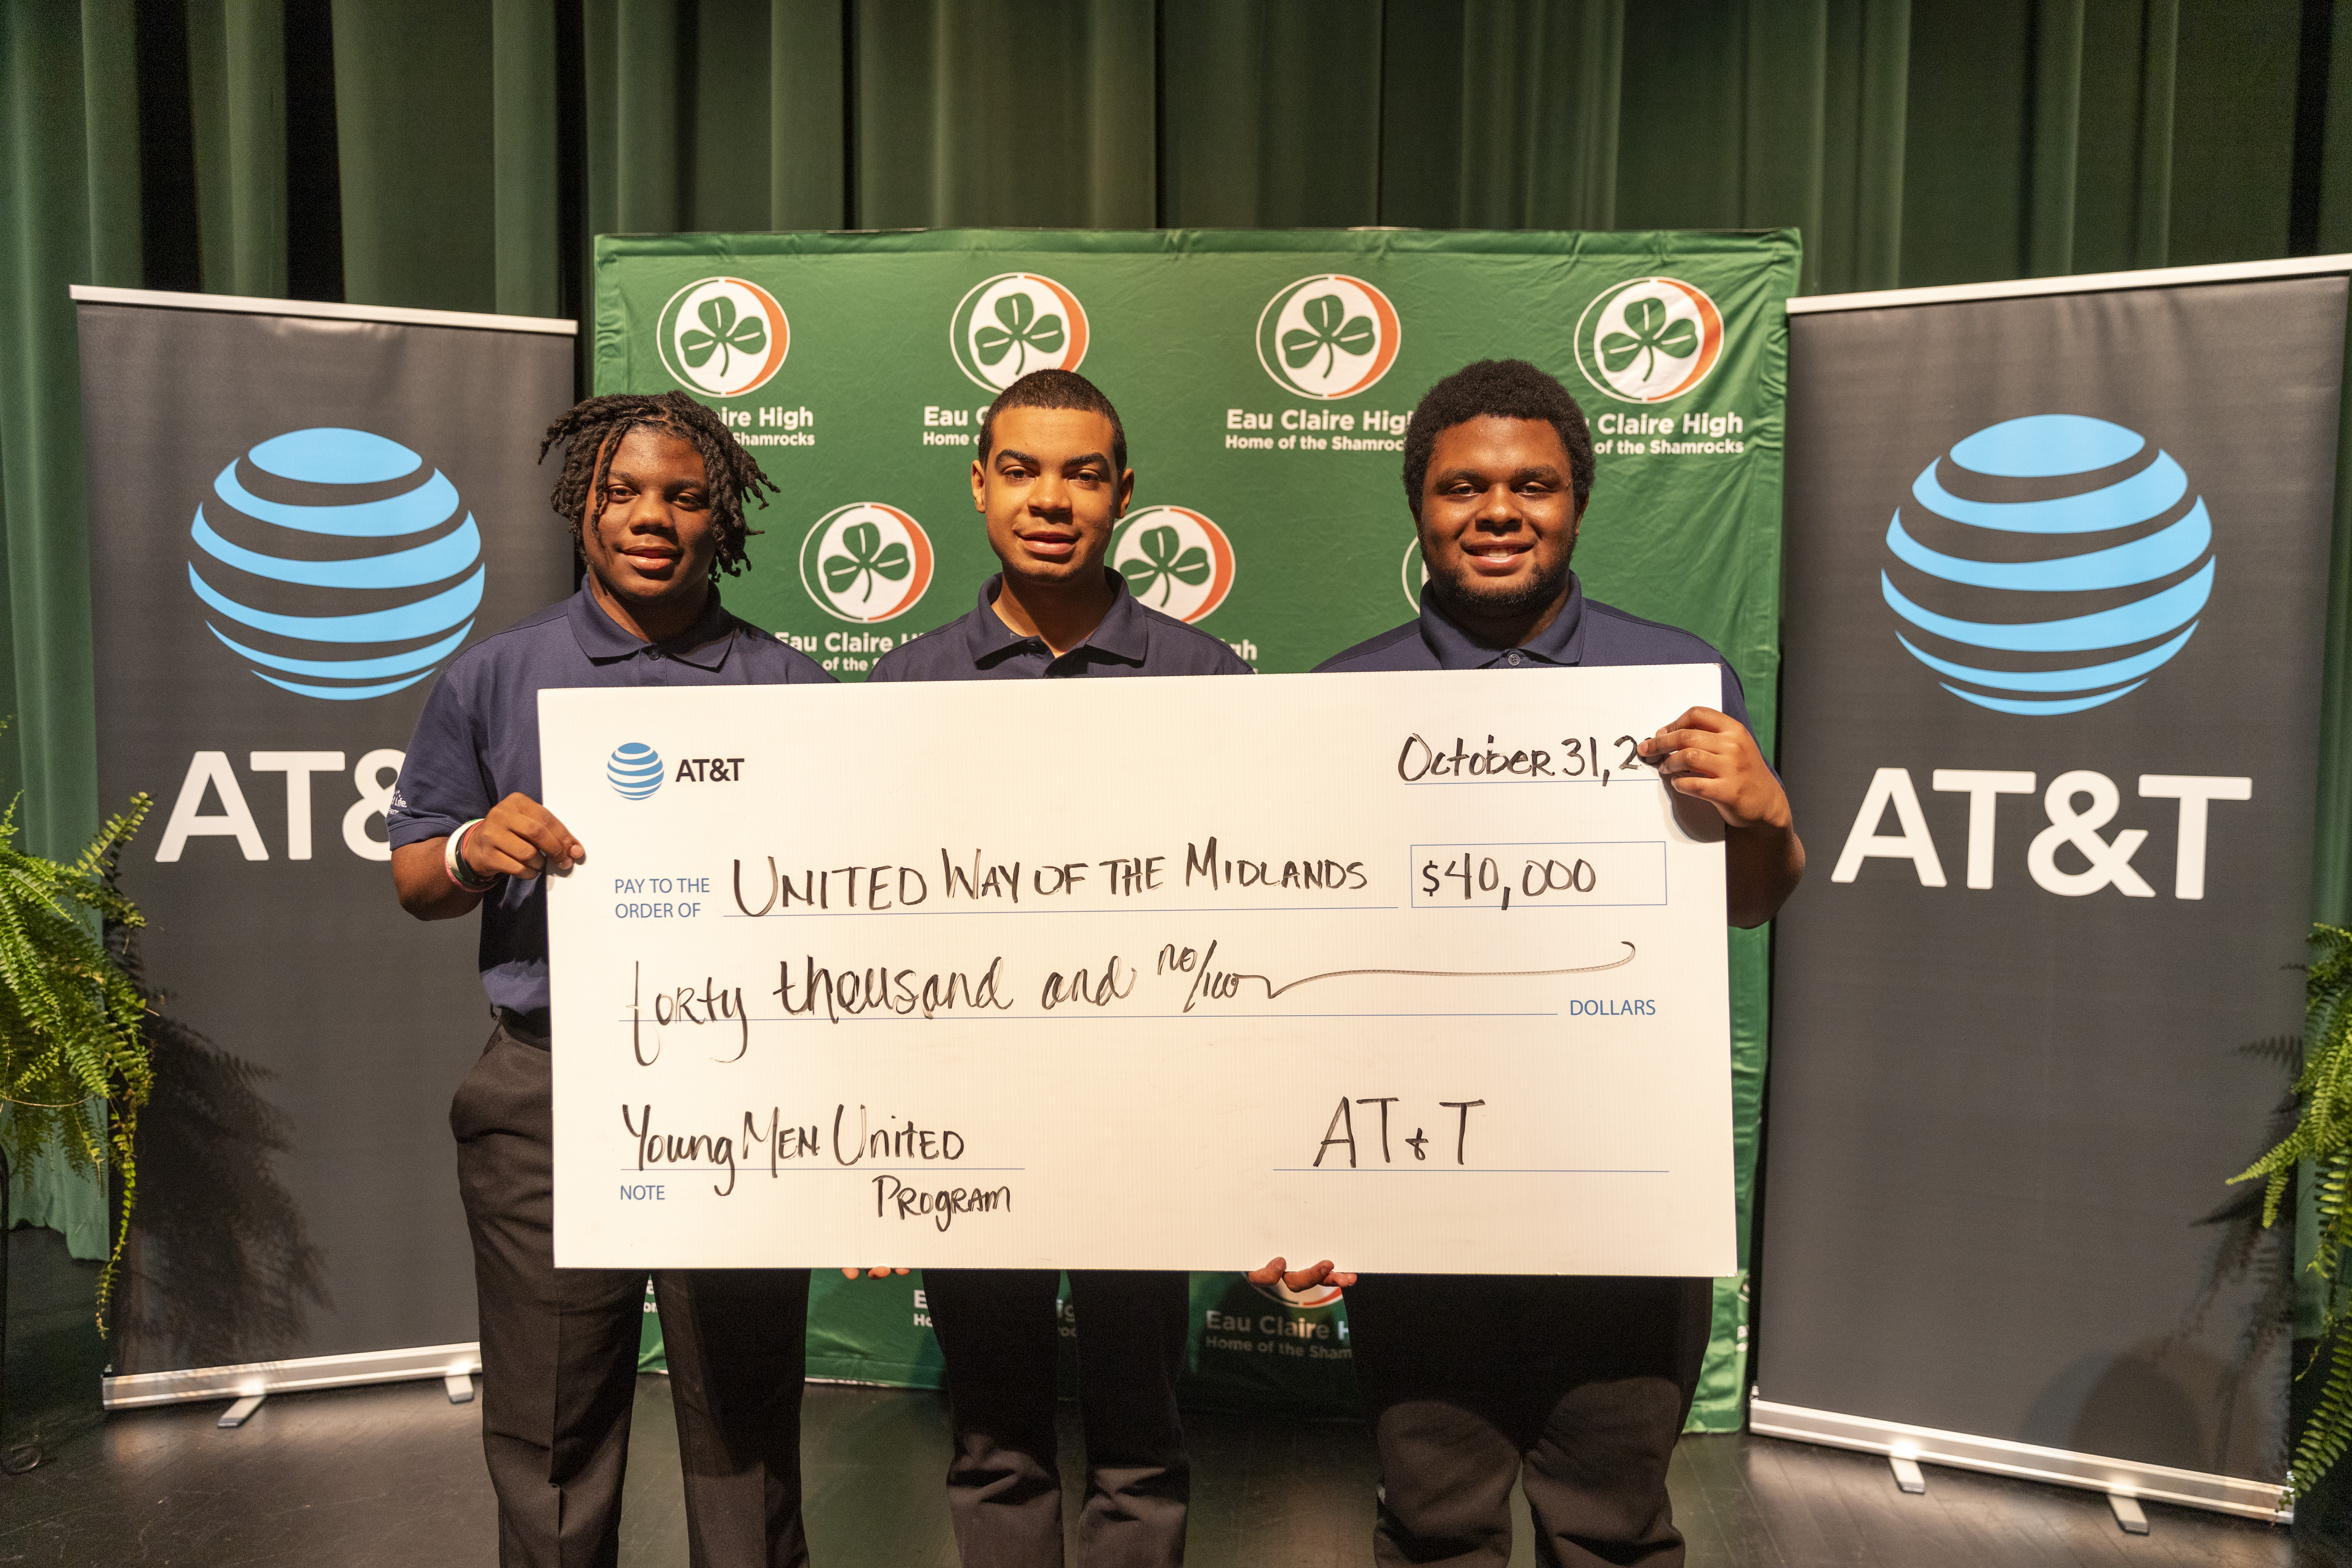 $40,000 check for Young Men United